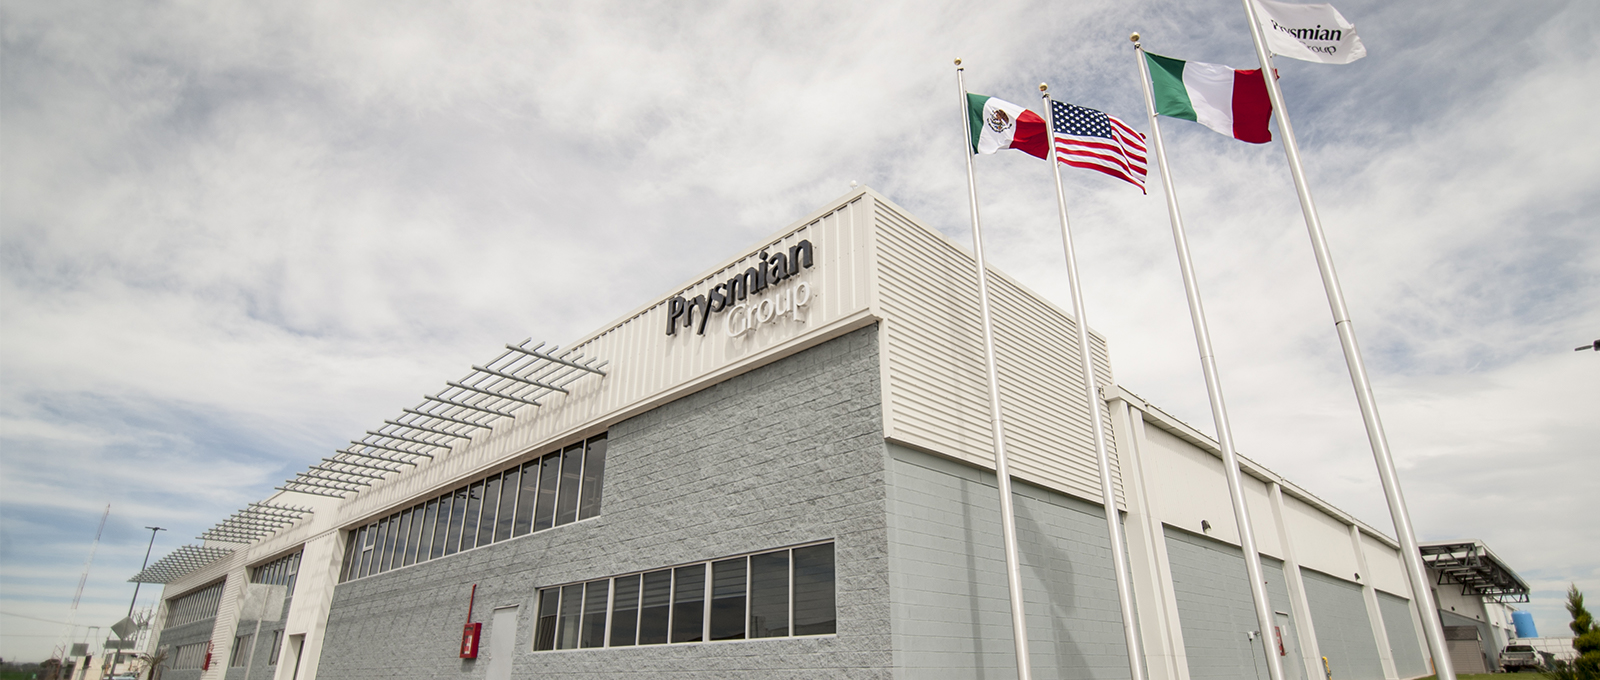 Prysmian Group to develop the largest project for broadband TLC cable in Mexico
